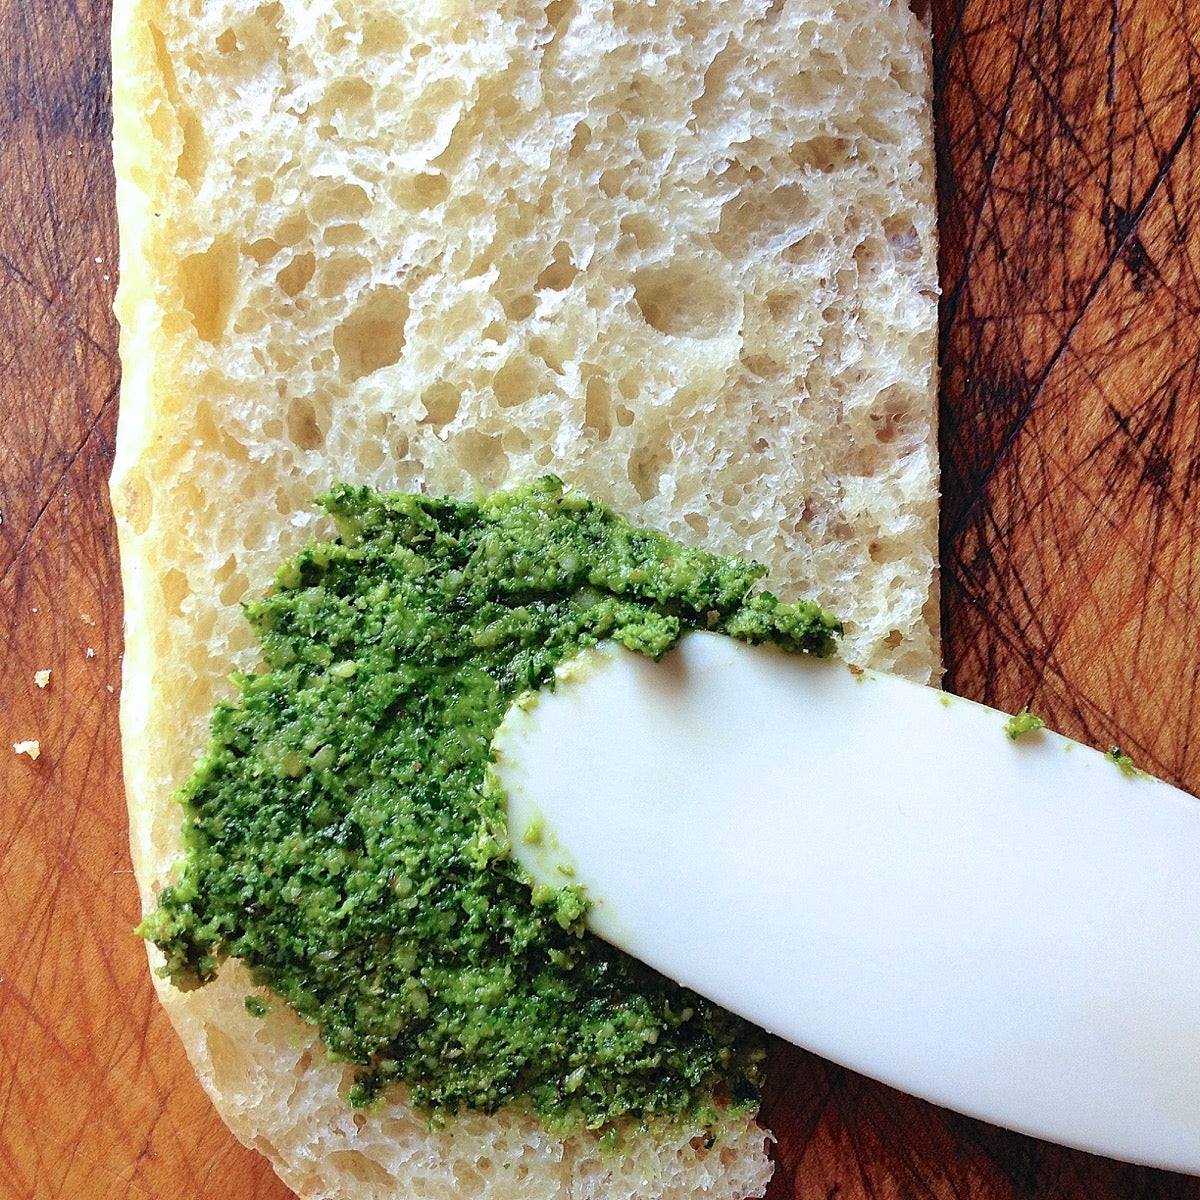 Bright green pesto being spread on a slice of baguette.